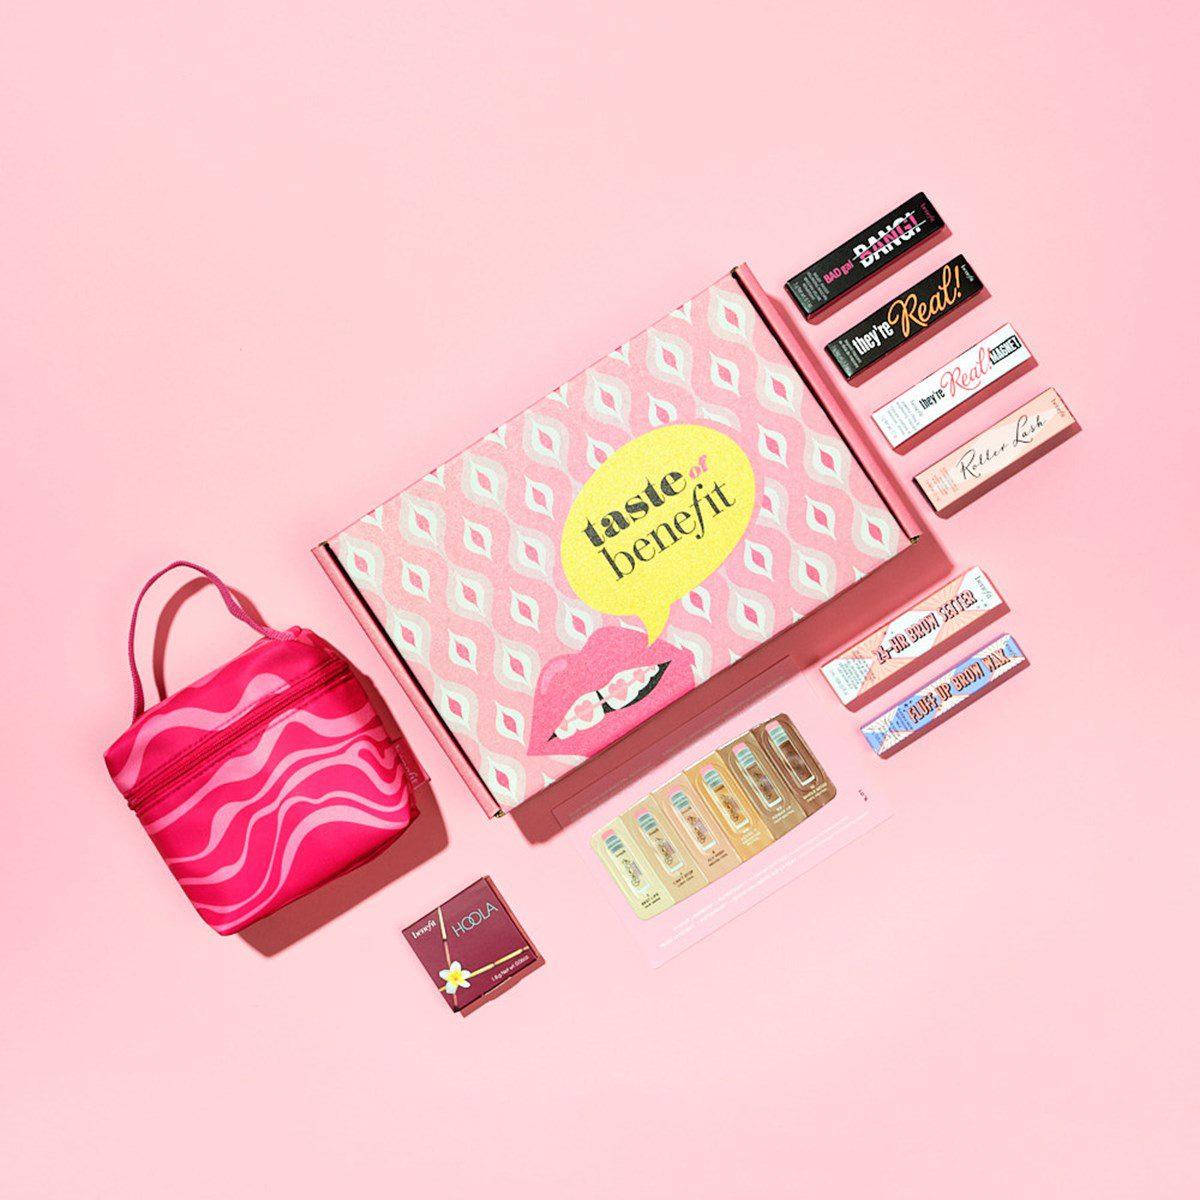 Read more about the article Taste of Benefit Sampler: A Curated box of Benefit Bestsellers